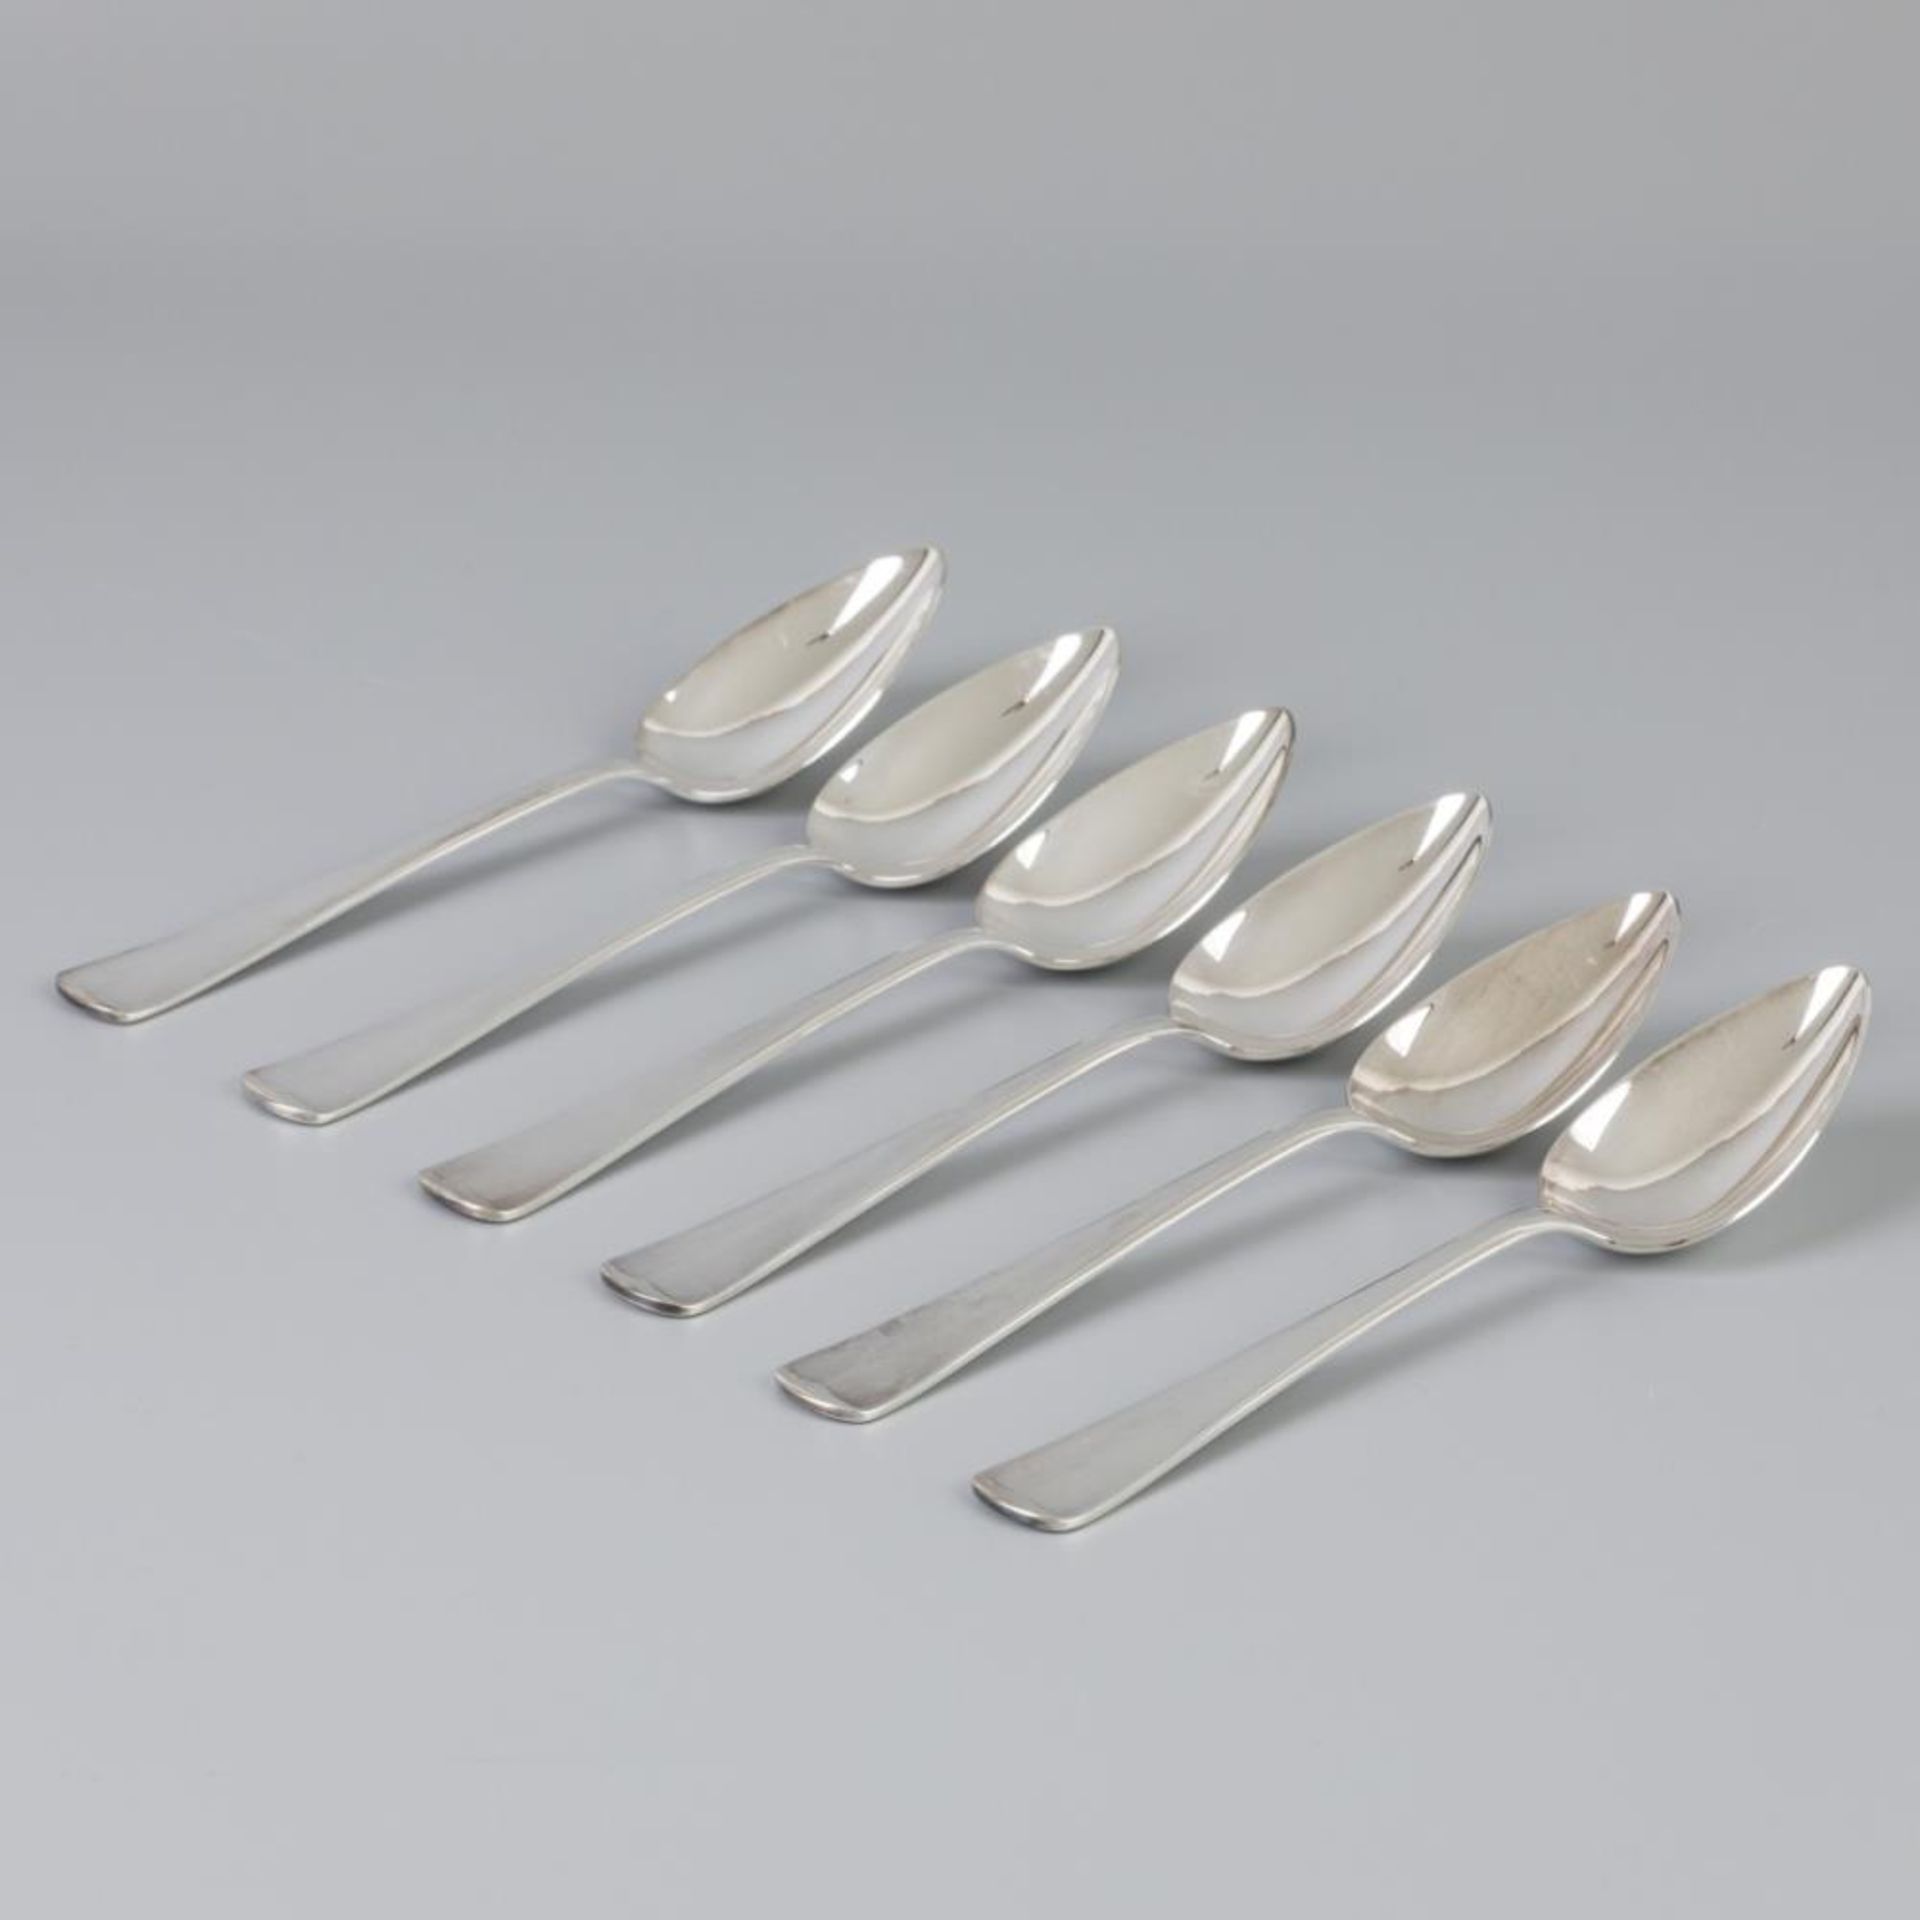 6 piece set of spoons "Haags Lofje"